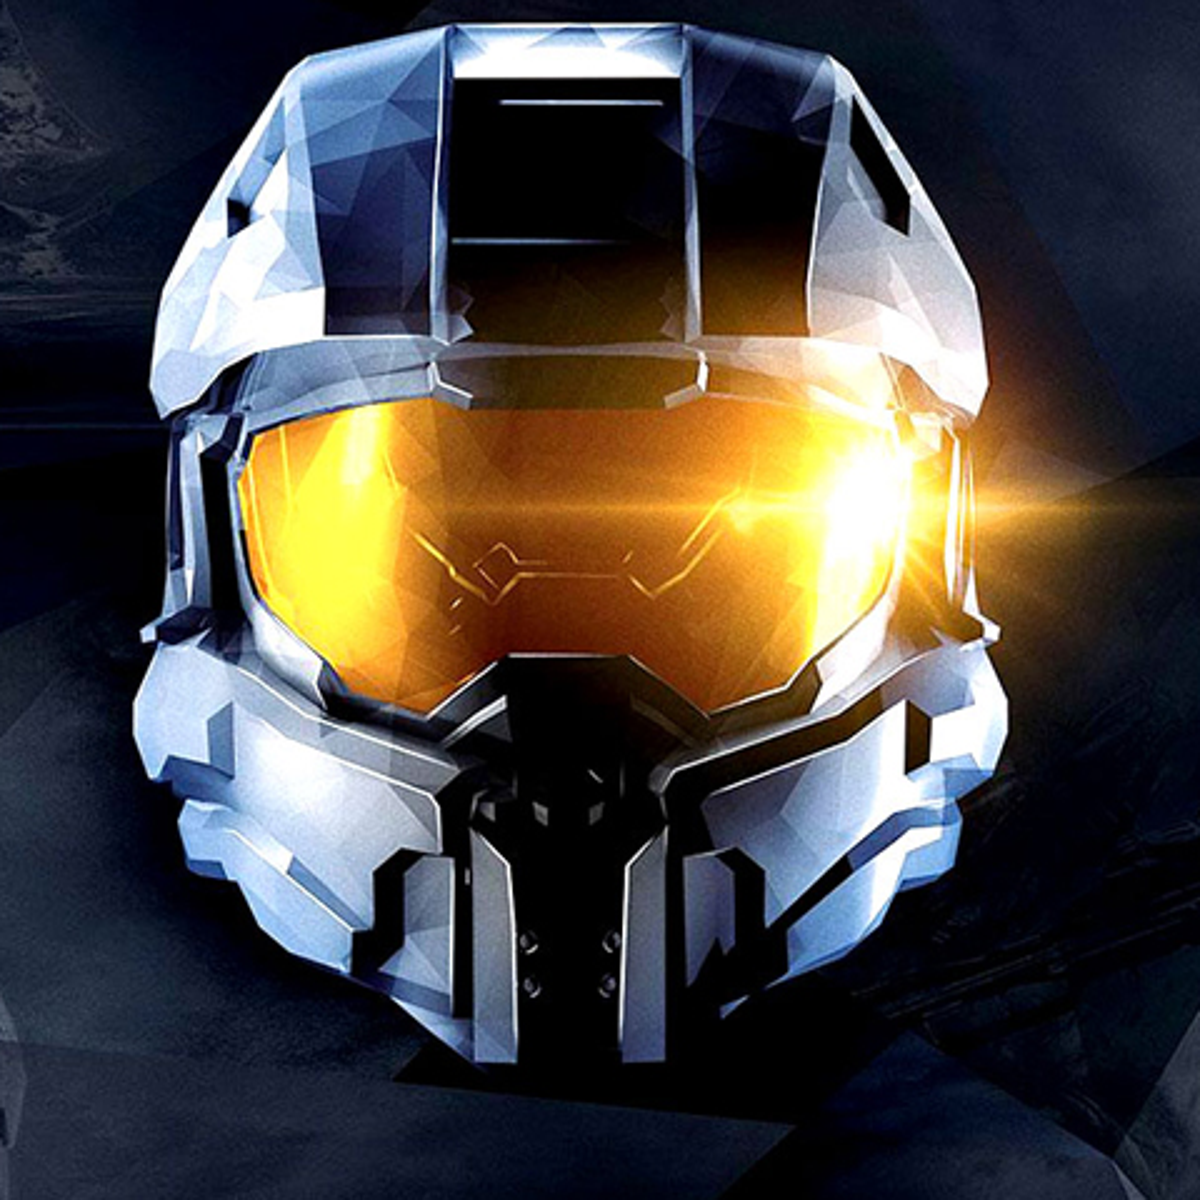 Halo Master Chief Collection PC set to feature ultra-widescreen